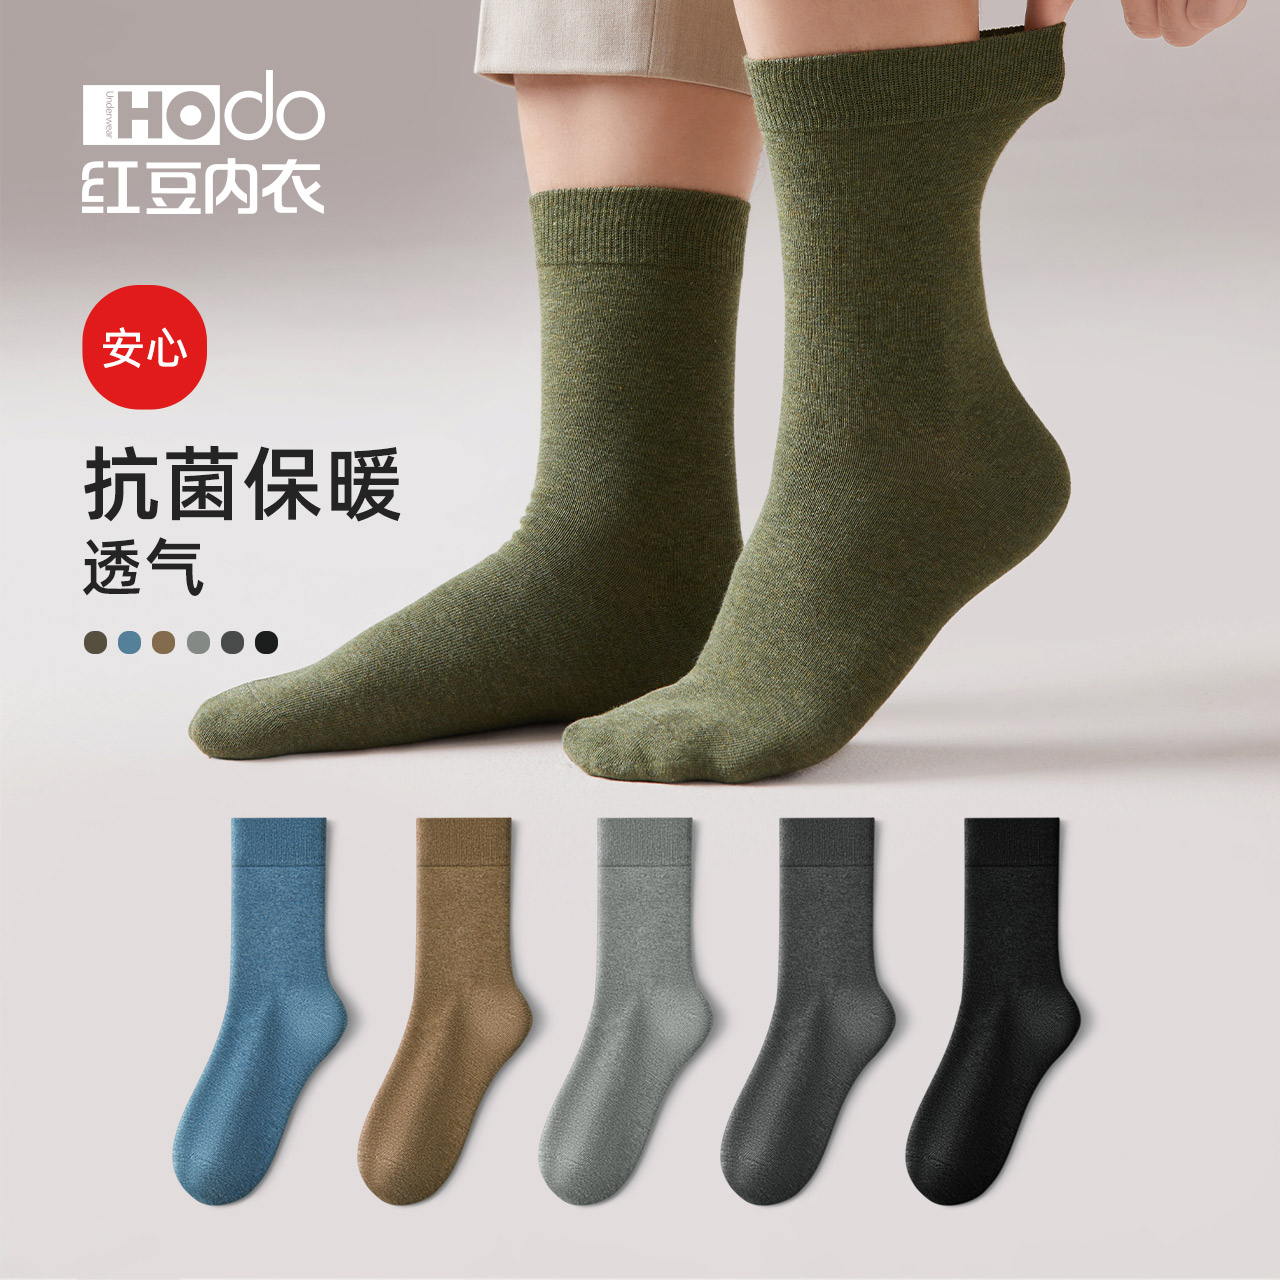 Men's combed pure cotton socks antibacterial and deodorant midbarrel socks color spinning autumn winter long socks casual sports cotton socks 5 Double fit-Taobao